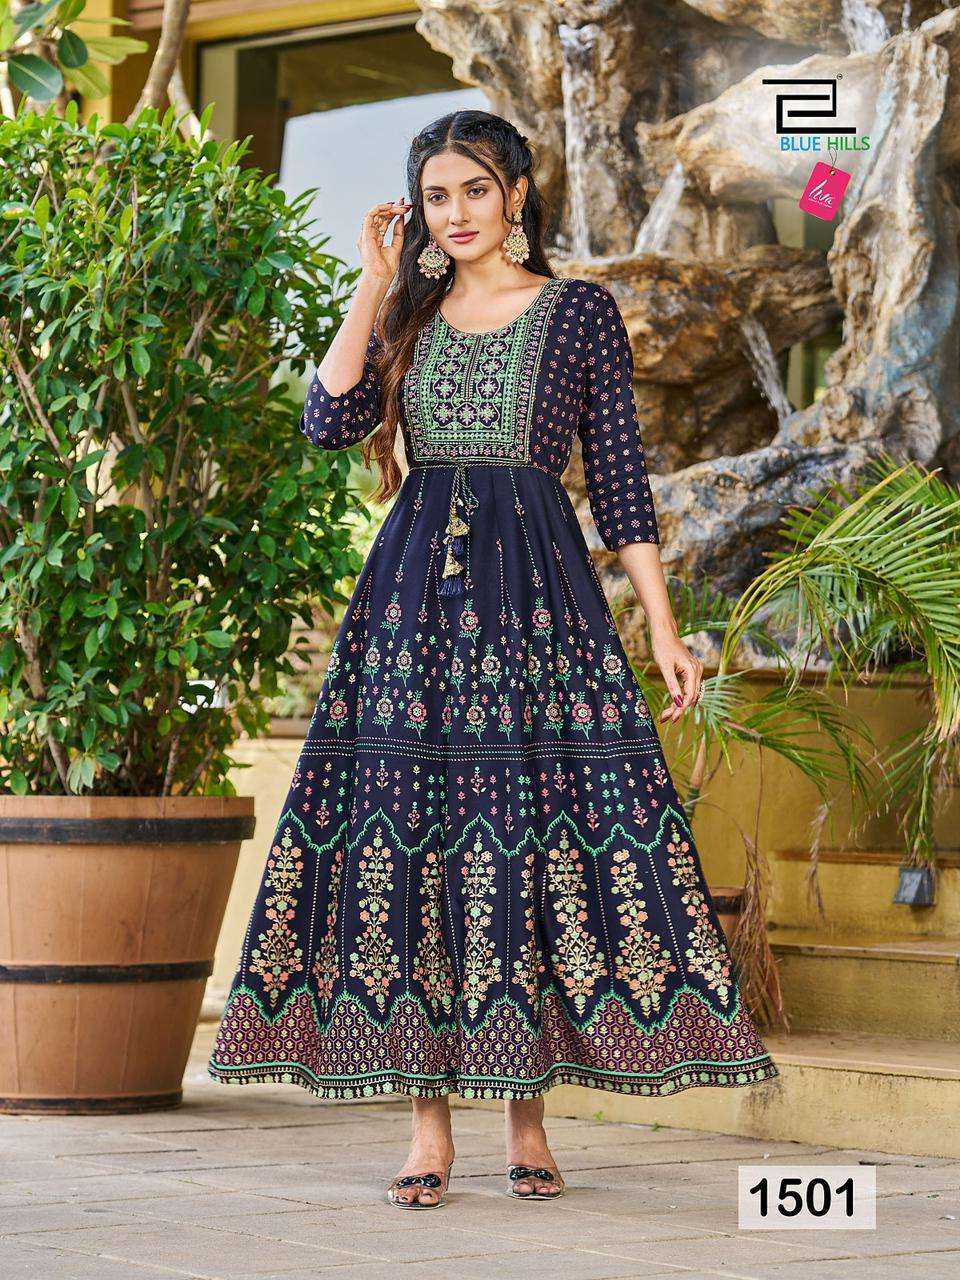 Diwali Special Sarees and Salwar Suits Online Collection with Discount  Offers | Fashion, Bollywood outfits, Party wear kurtis